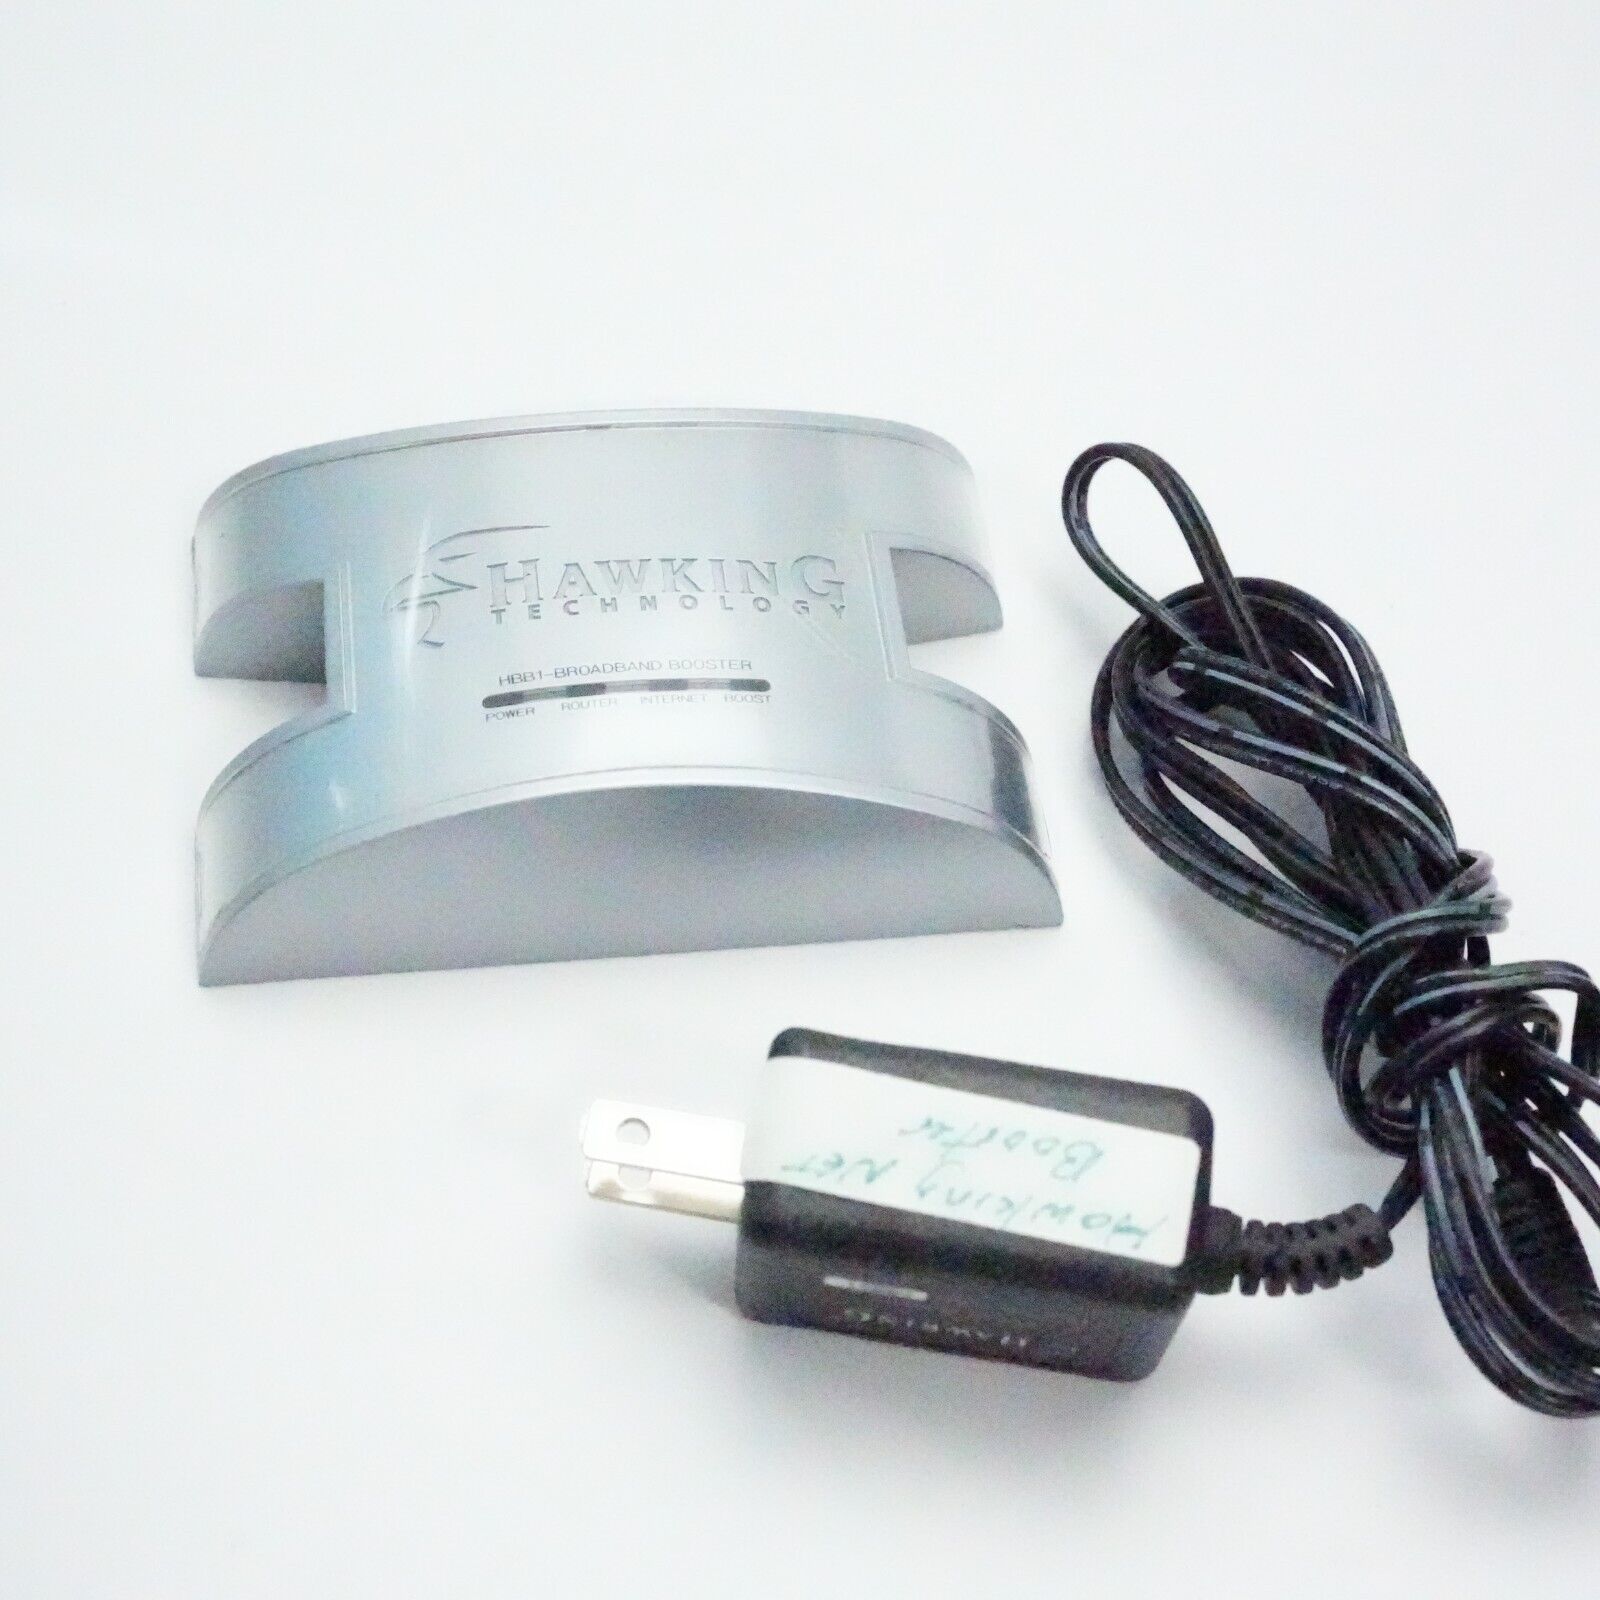 Hawking Technology HBB1 Wired Ethernet Signal Booster